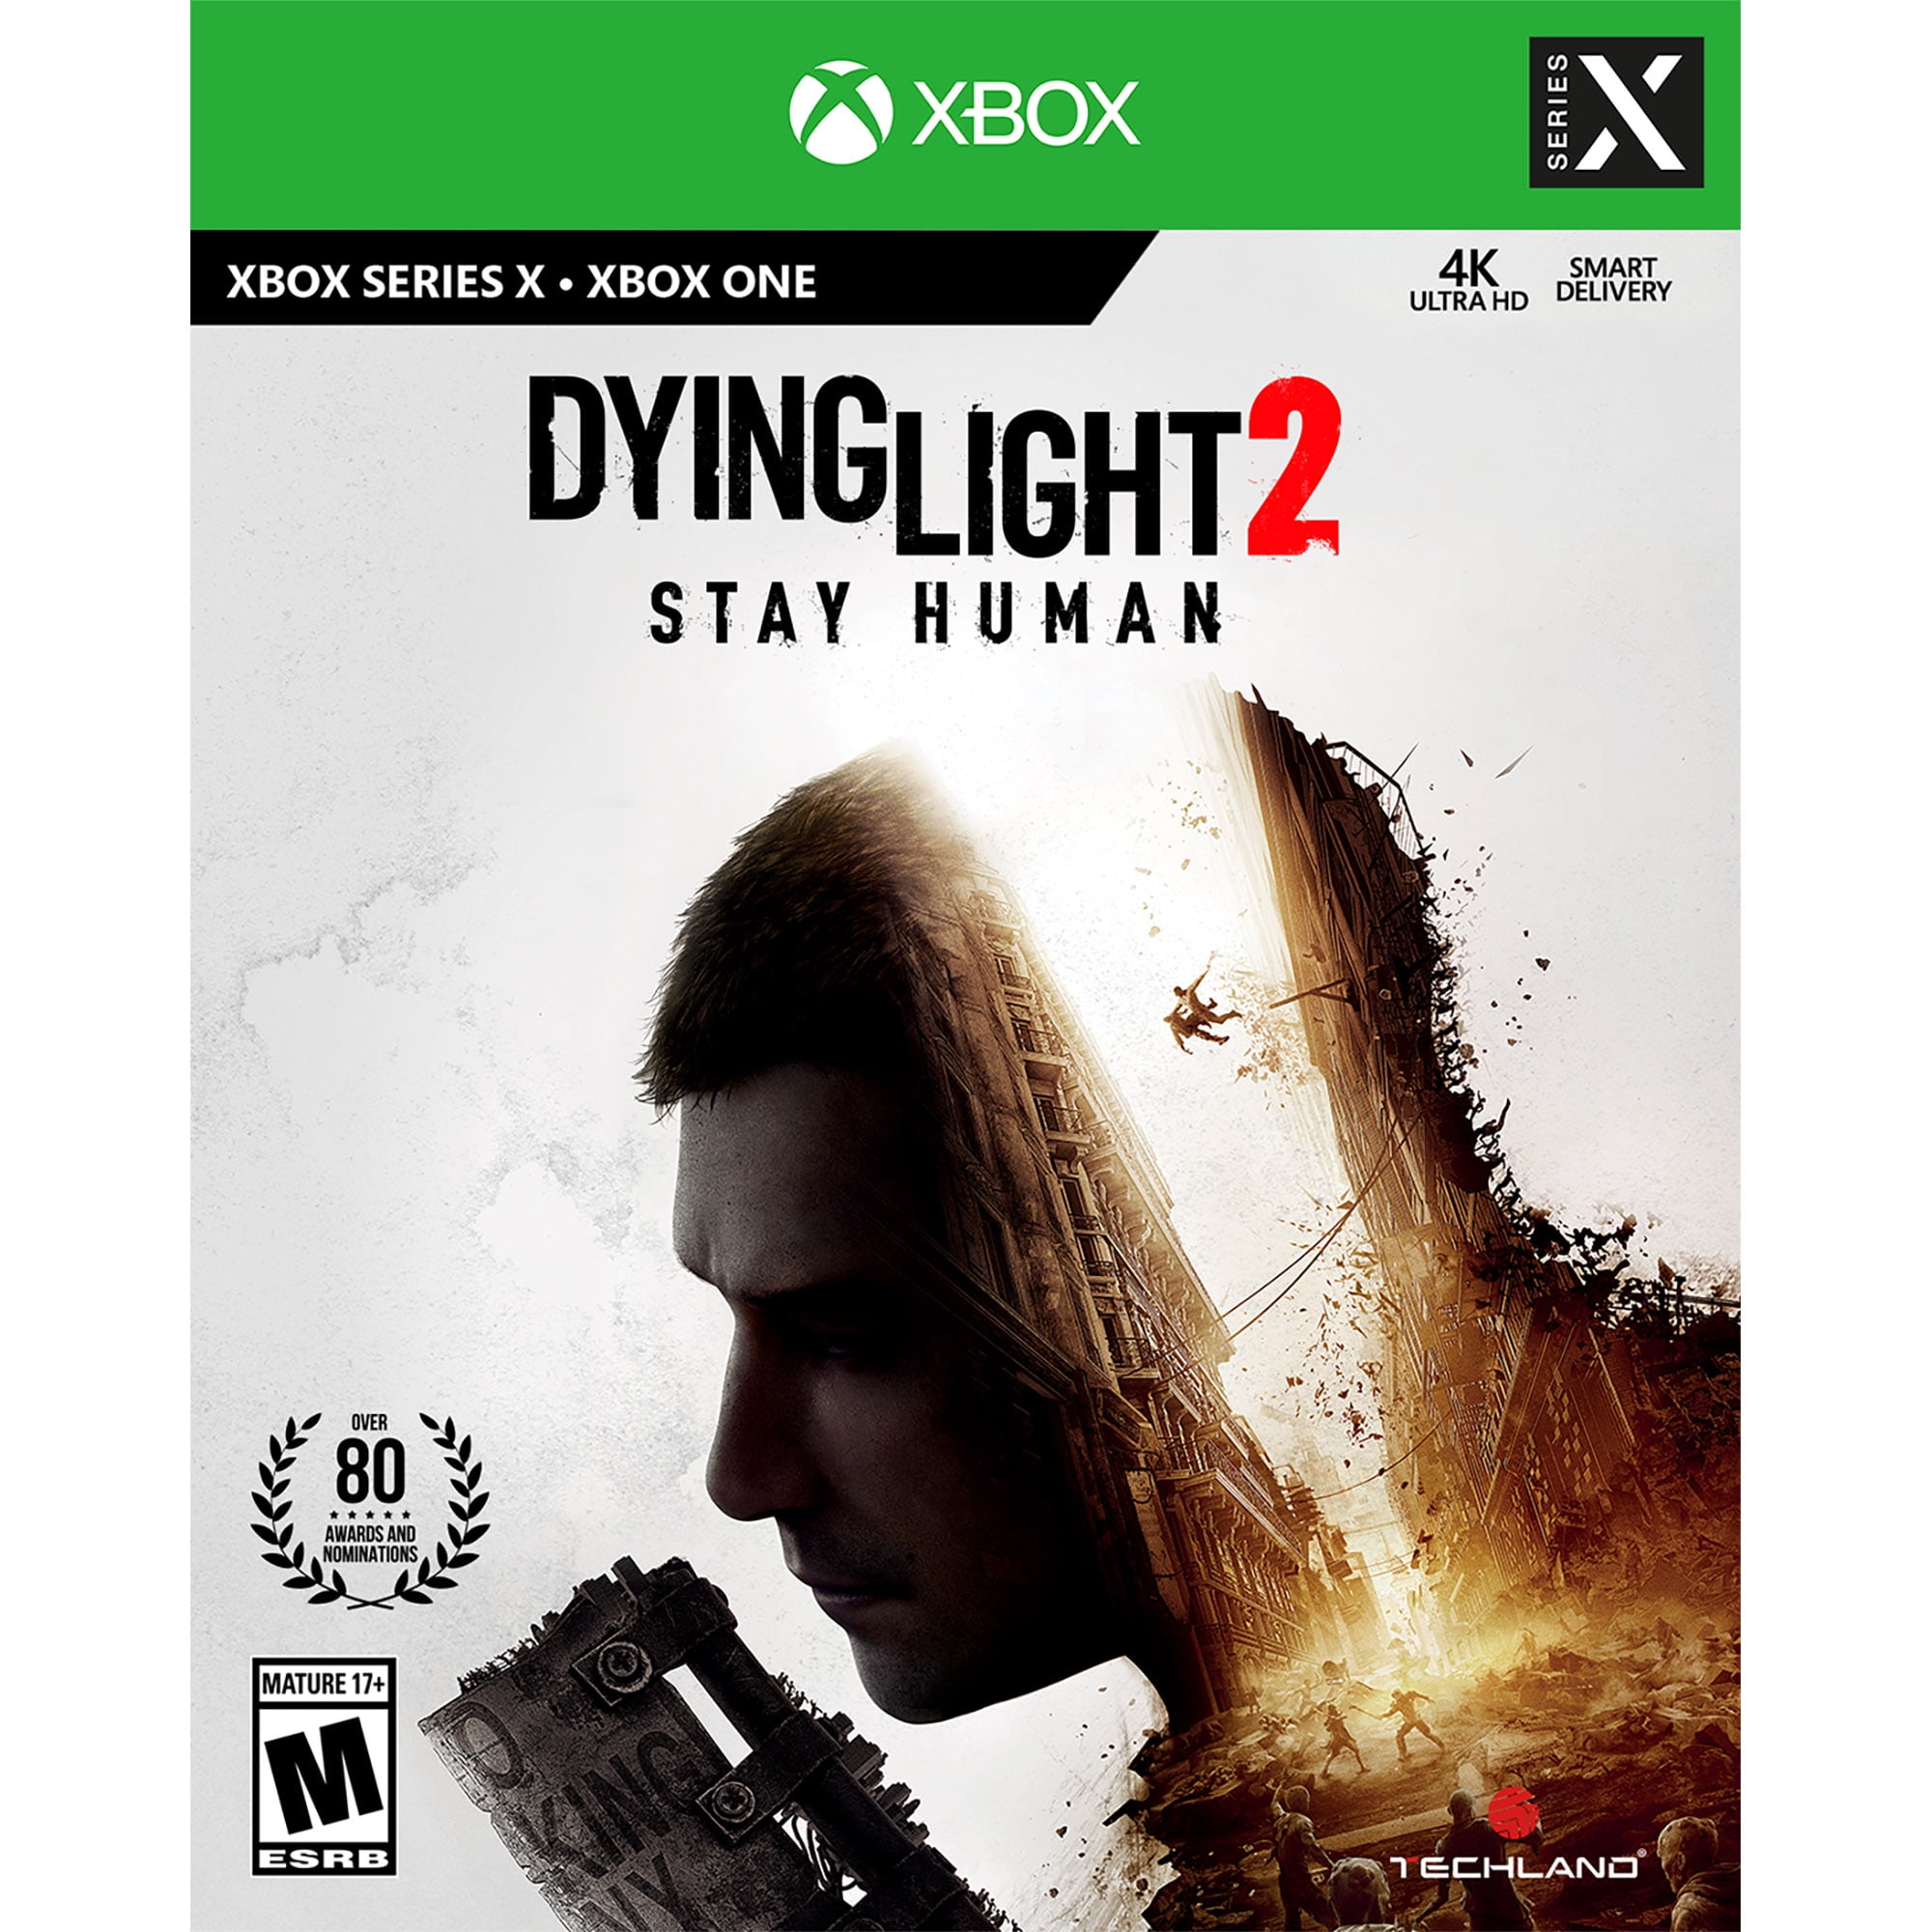 YMMV In-store Dying Light 2 Stay Human - Xbox Series X, Xbox One $21